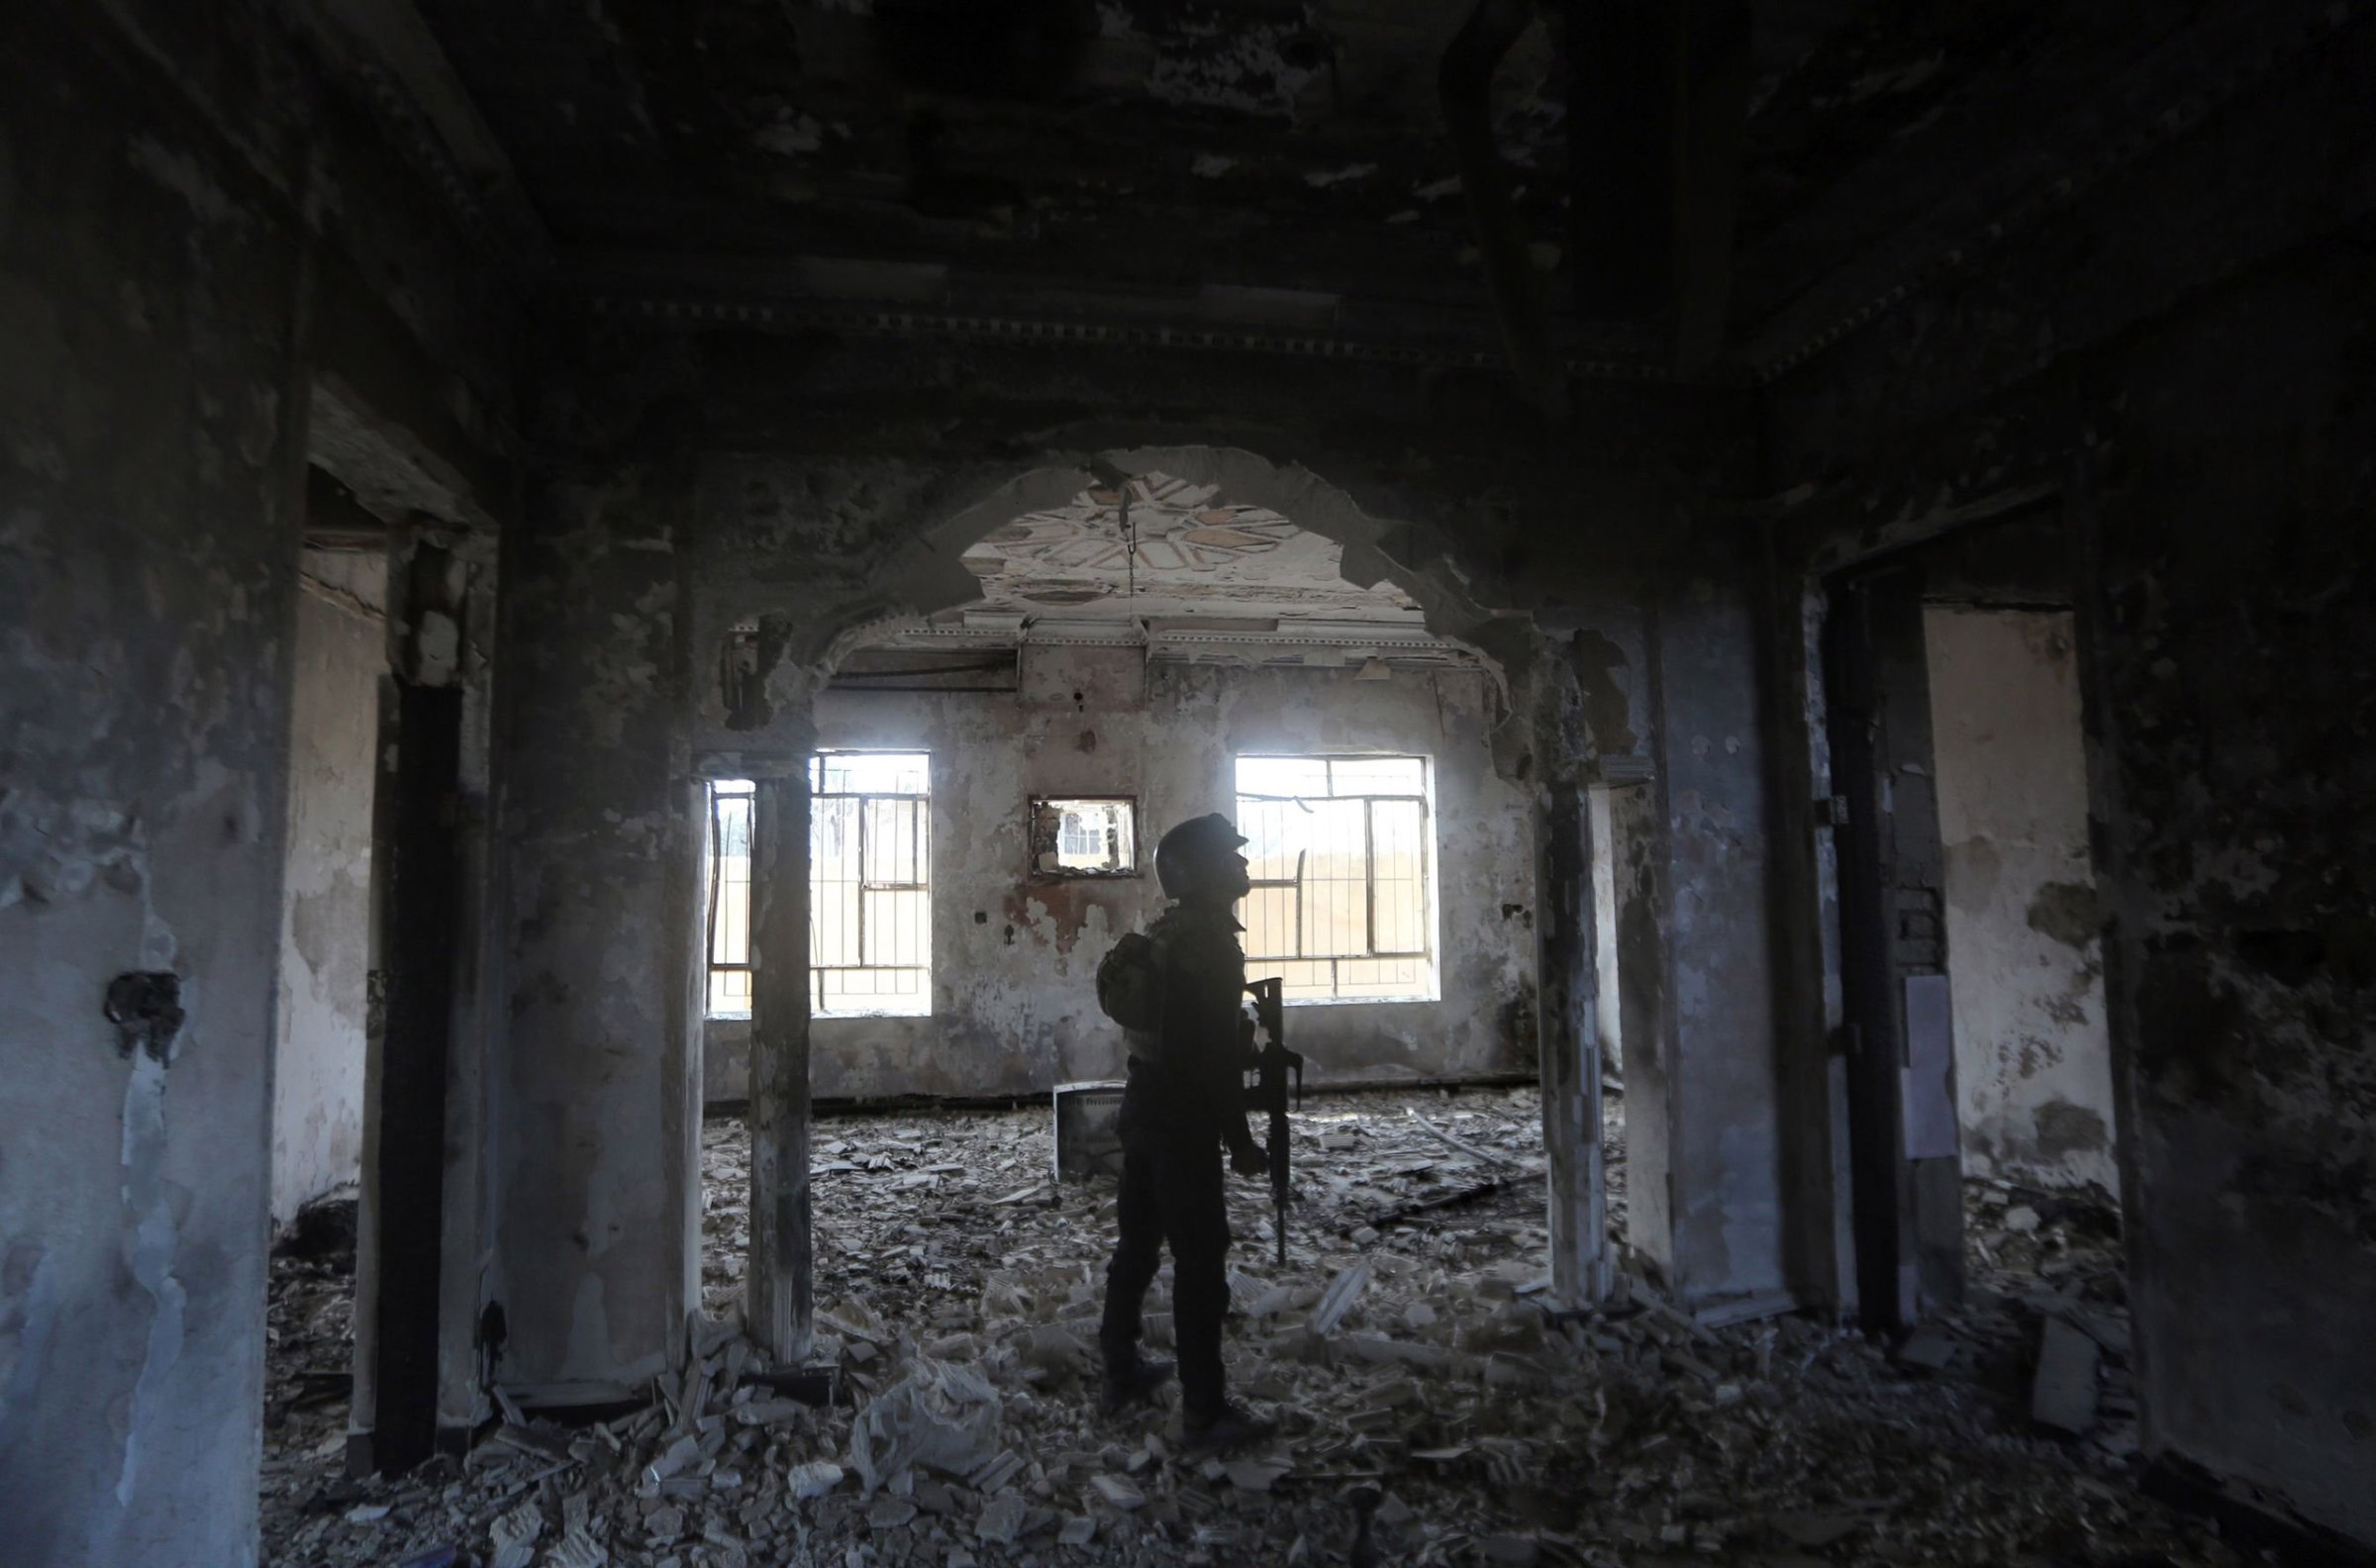 Members of Iraq's elite counter-terrorism service search a heavily damaged building in Ramadi on Dec. 27, 2015.